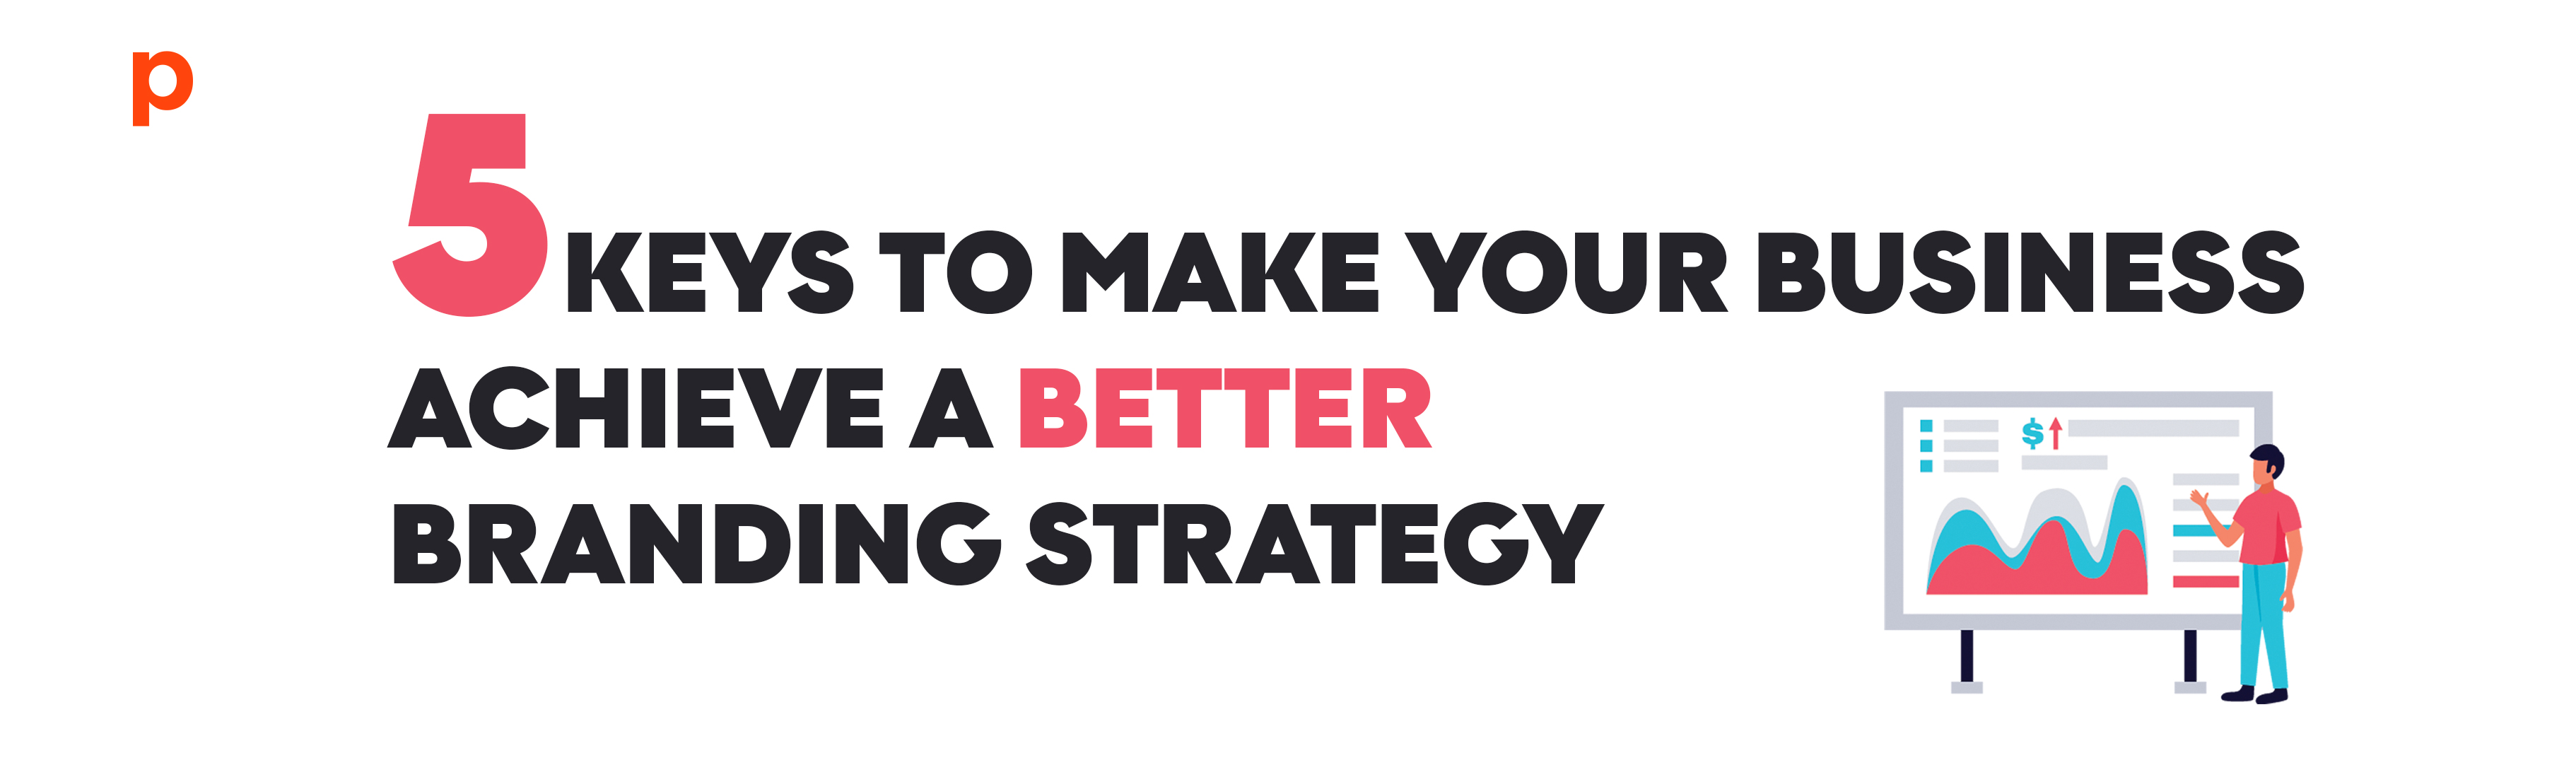 5 Keys to Make your Business achieve a Better Branding Strategy